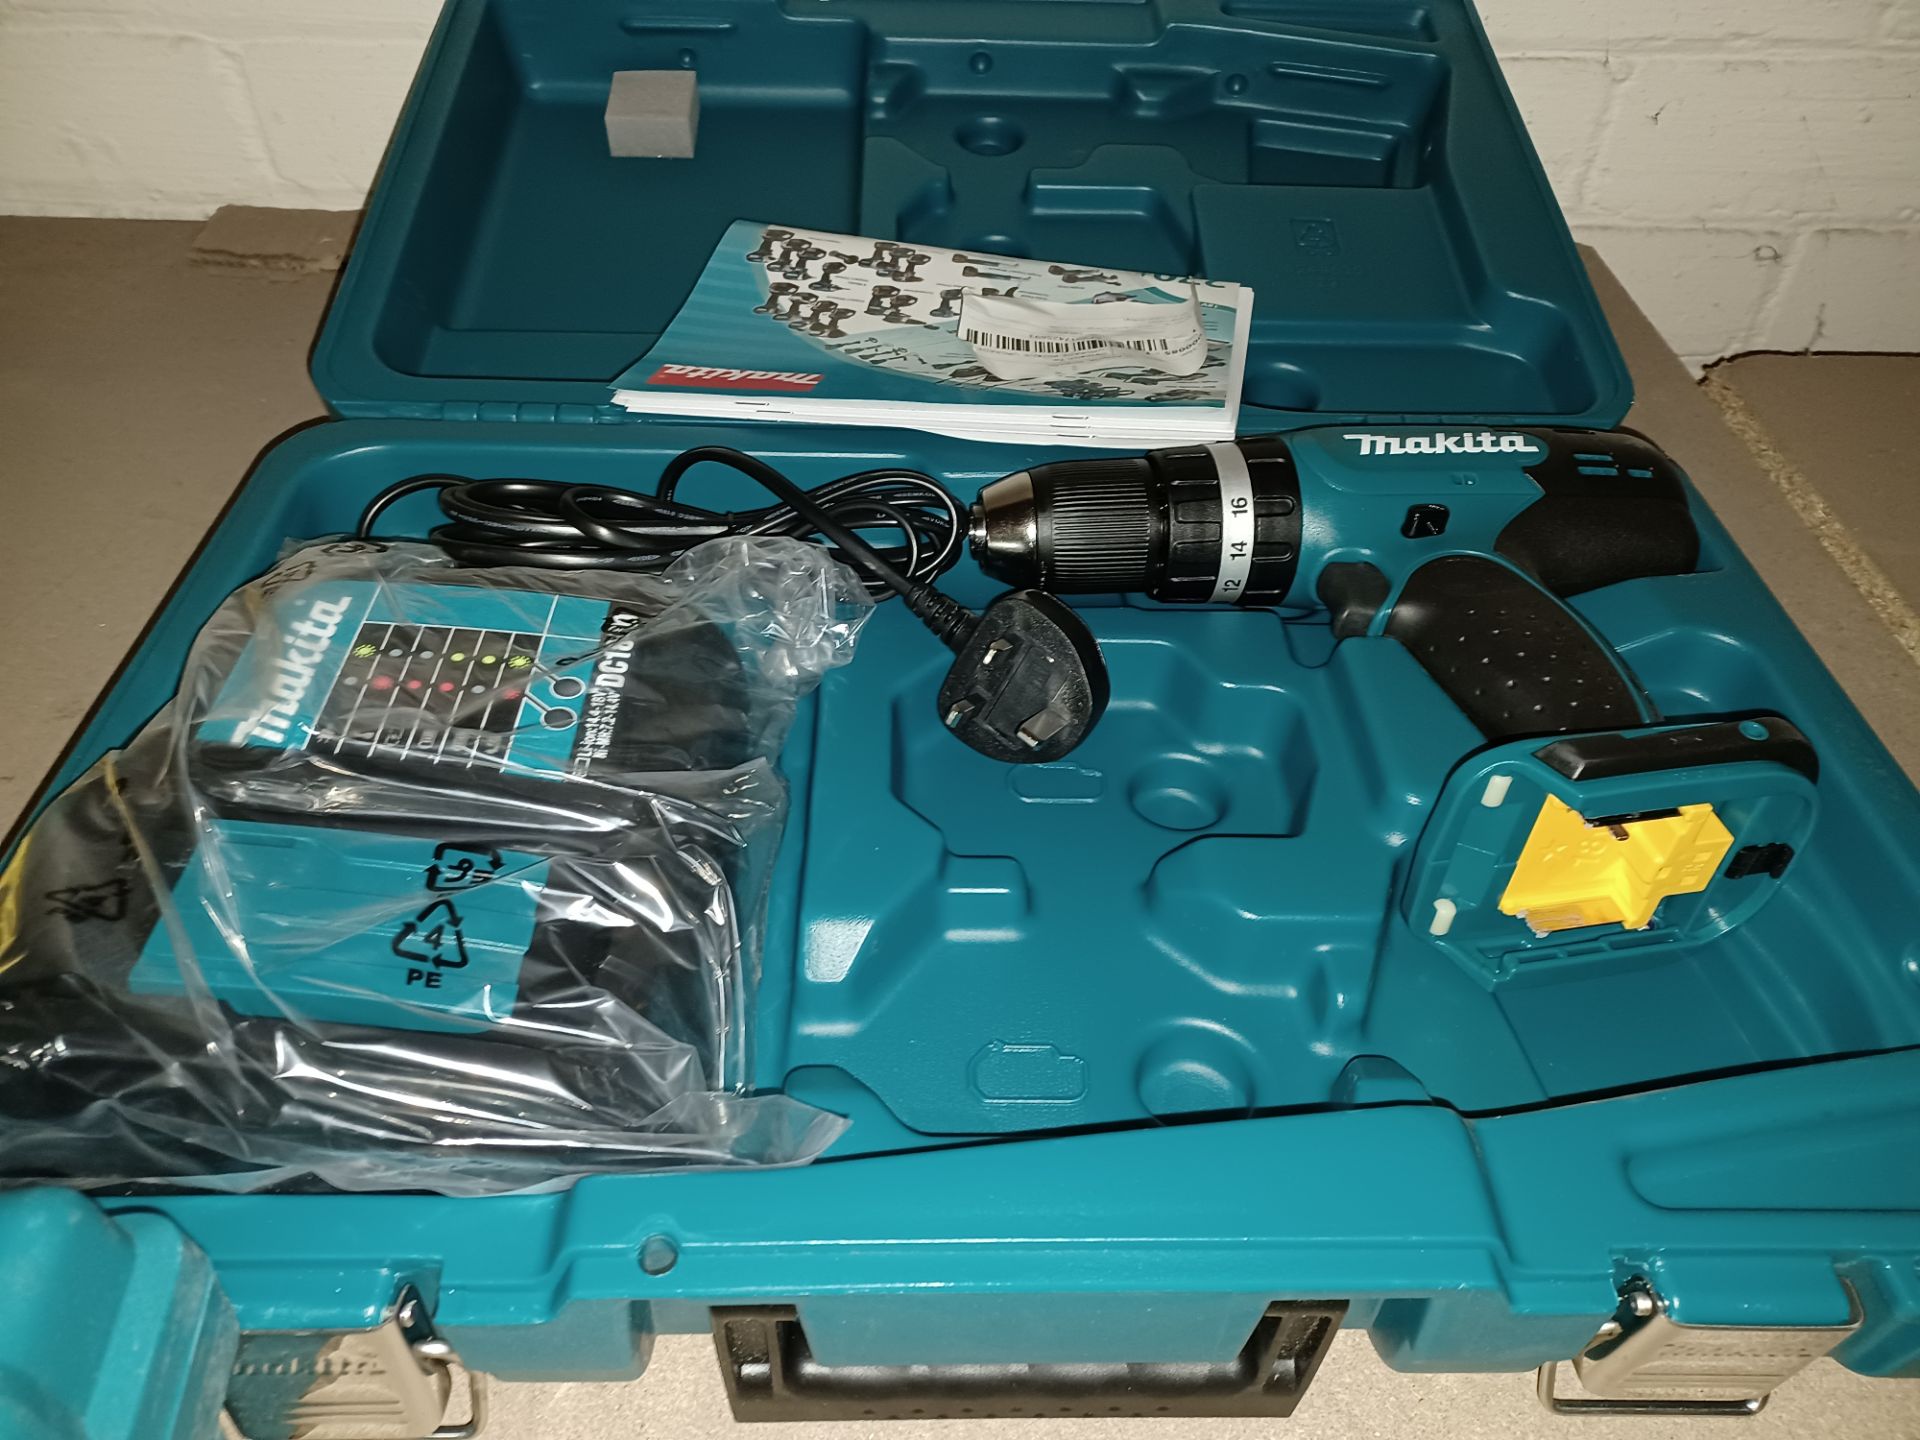 MAKITA DHP453STE 18V 5.0AH LI-ION LXT CORDLESS COMBI DRILL COMES WITH CHARGER AND CARRY CASE